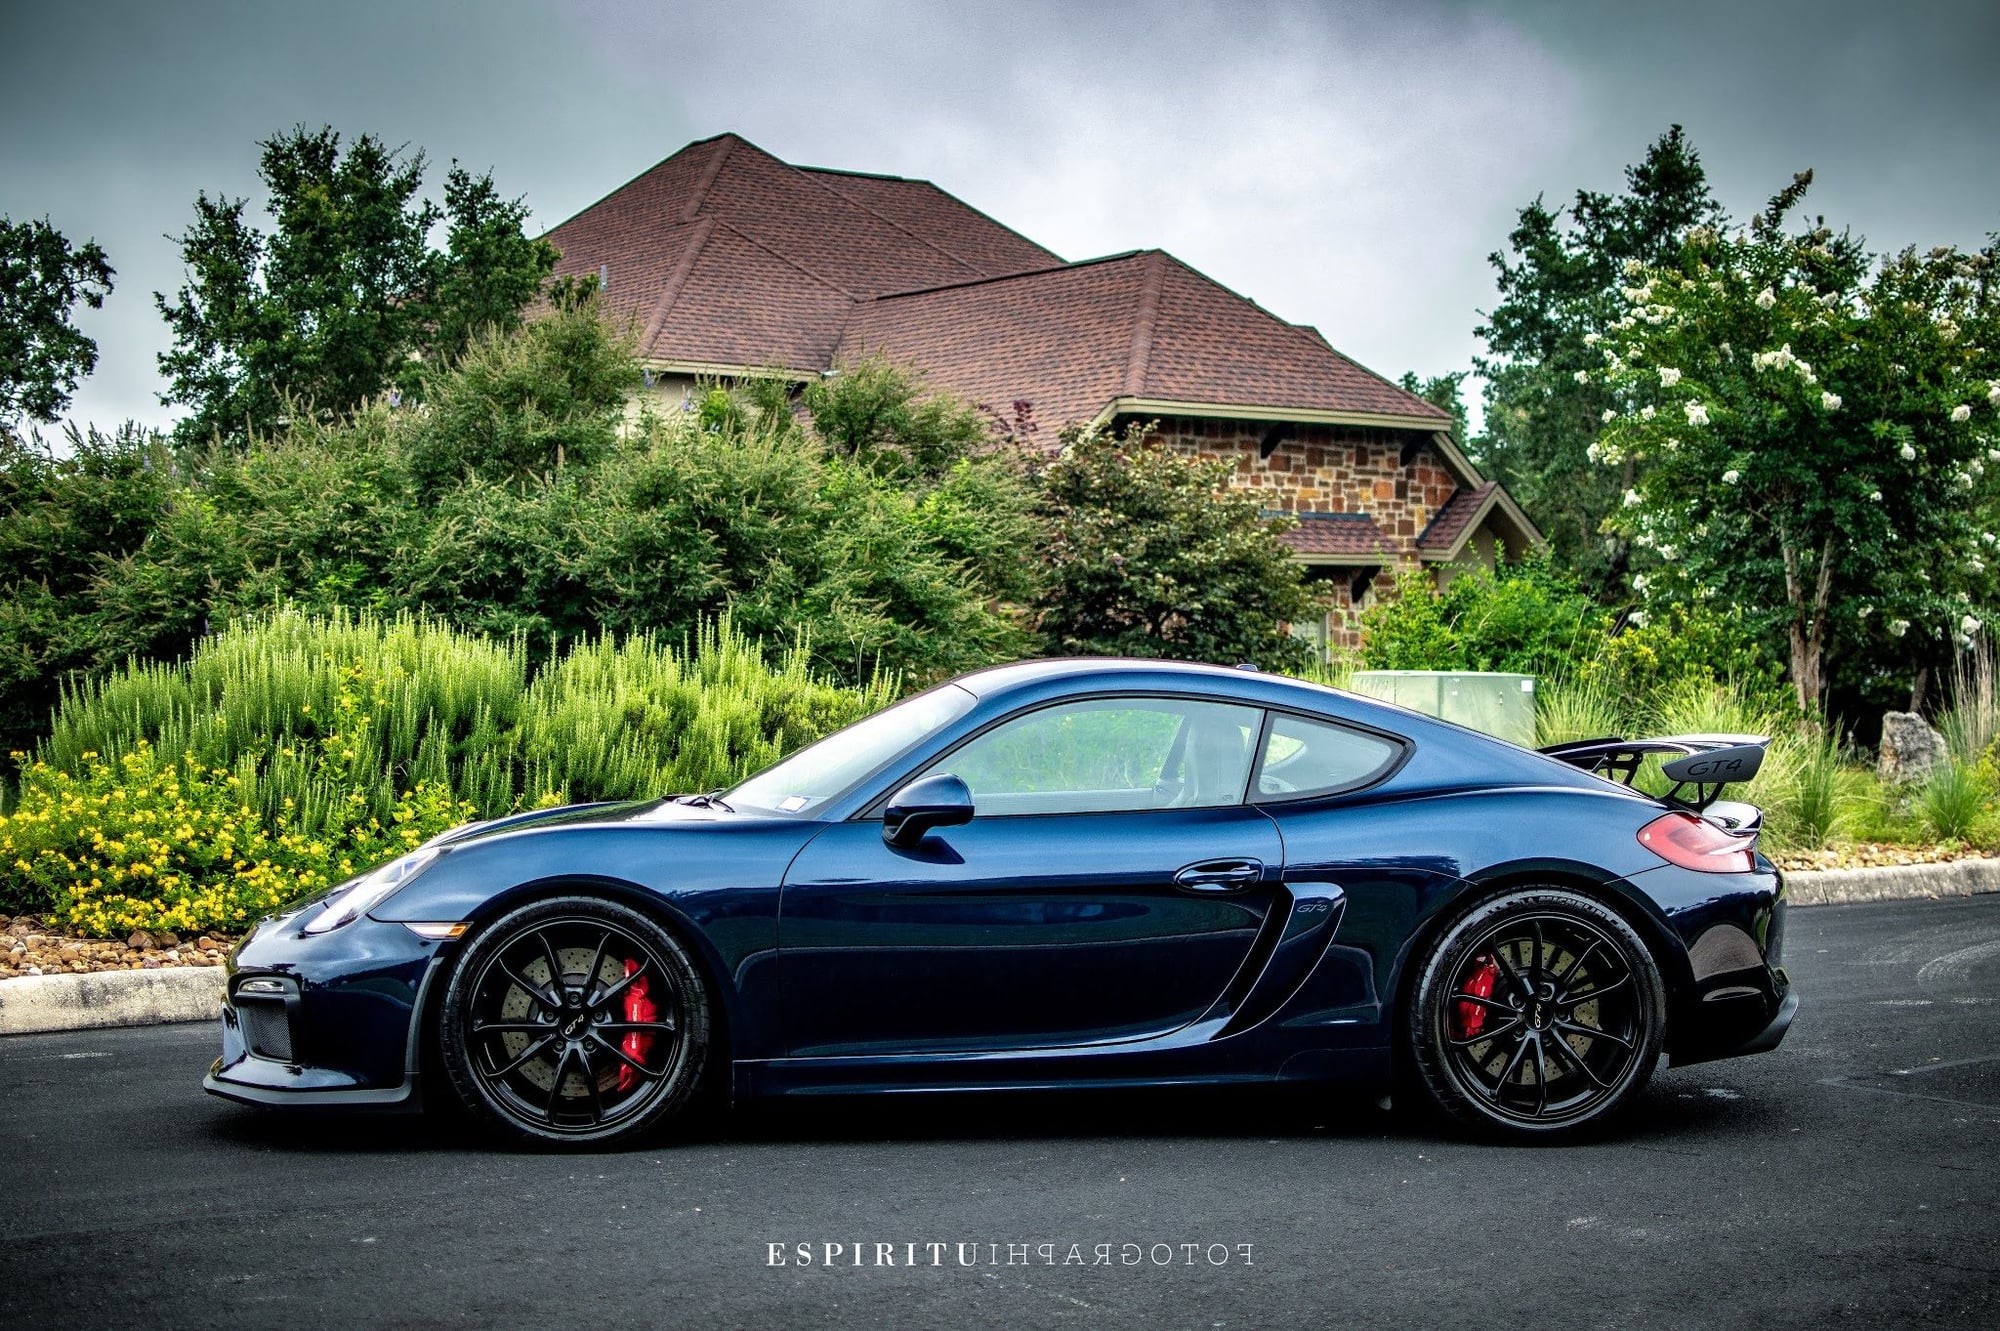 2016 Porsche Cayman GT4 - Rare color -  dark blue metallic gt4 - Used - VIN WP0AC2A80GK197388 - 7,800 Miles - 6 cyl - 2WD - Manual - Coupe - Blue - Boerne, TX 78015, United States